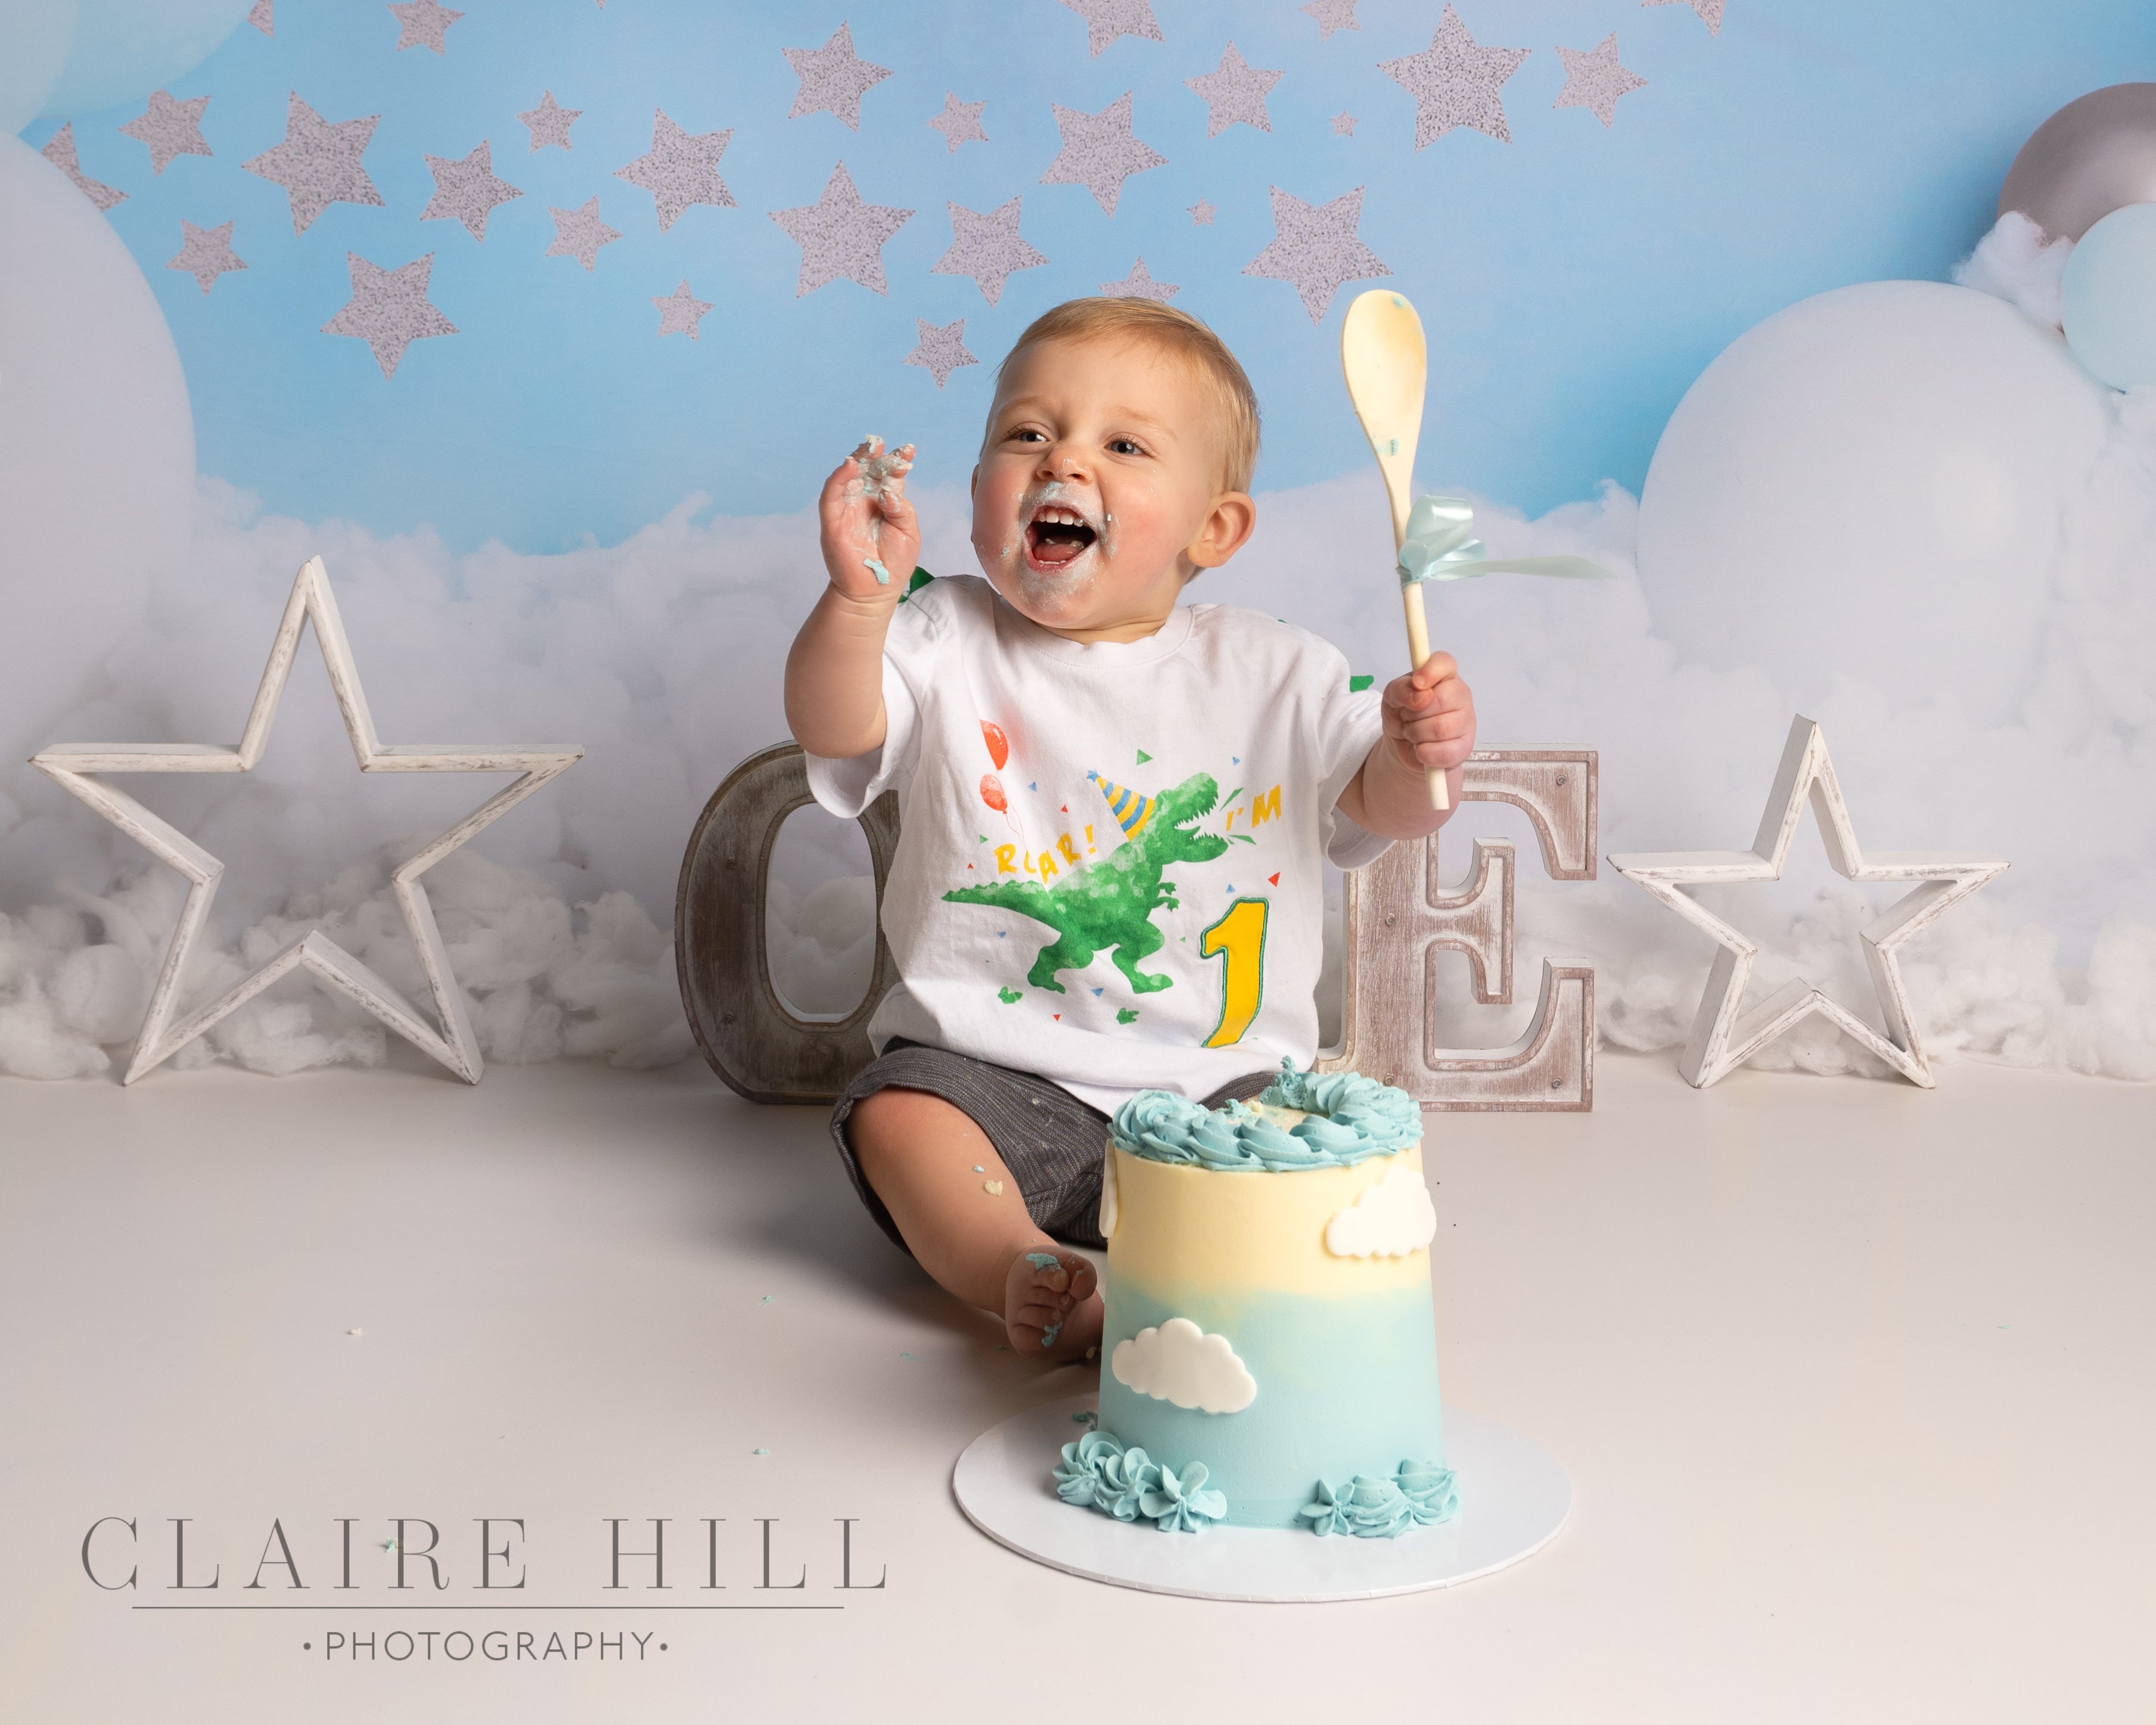 Babies 1st year photo shoot bundle in Wolverhampton West Midlands near Birmingham and Shropshire three photo shoots including newborn photography Sitter session and cake smash photo shoot by Claire Hill Photography.